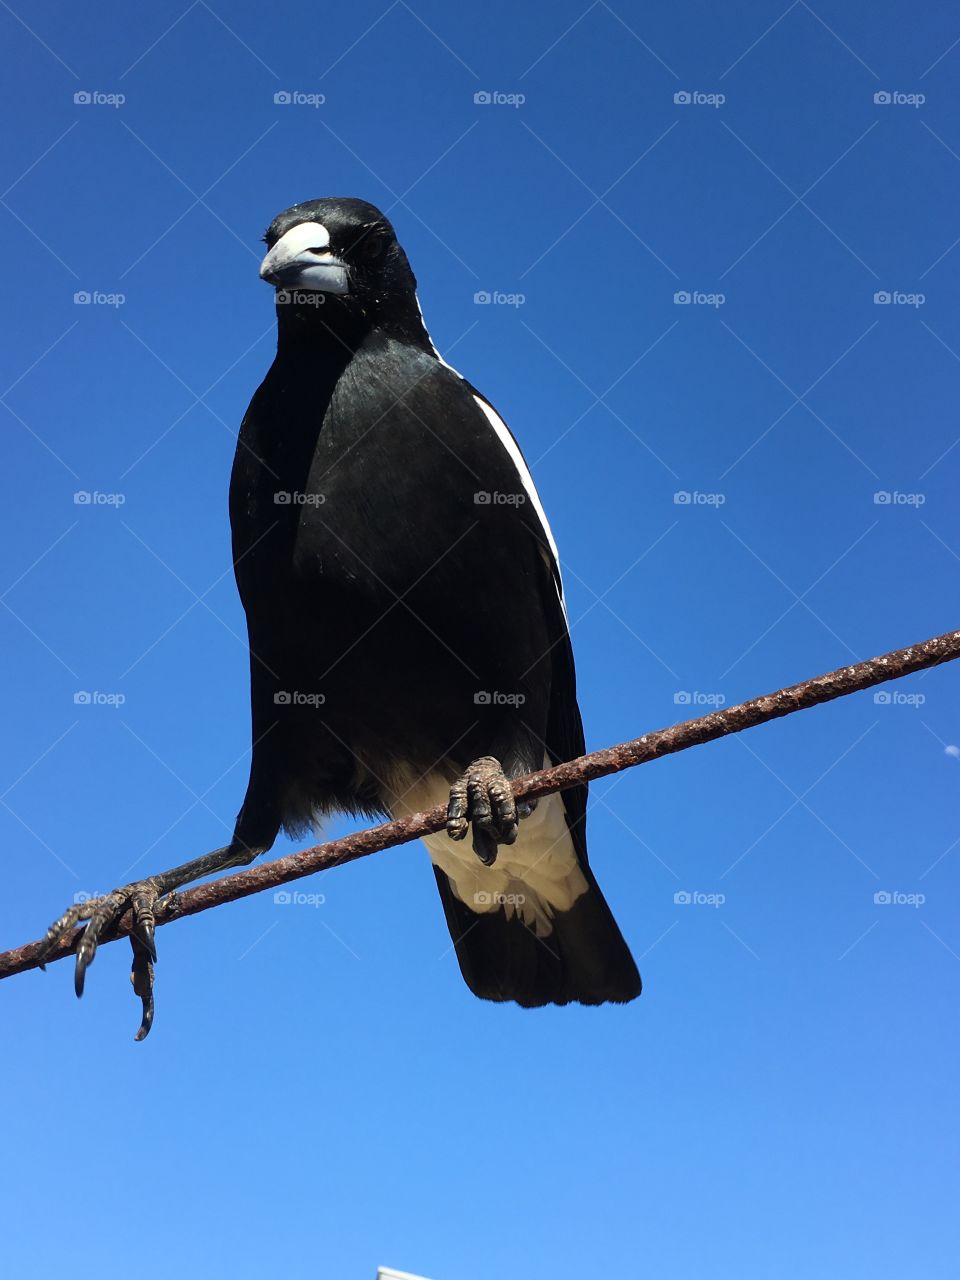 Easy does it balancing act by a saucy large wild magpie on a wire beautifully contrasted against a bright clear blue sky